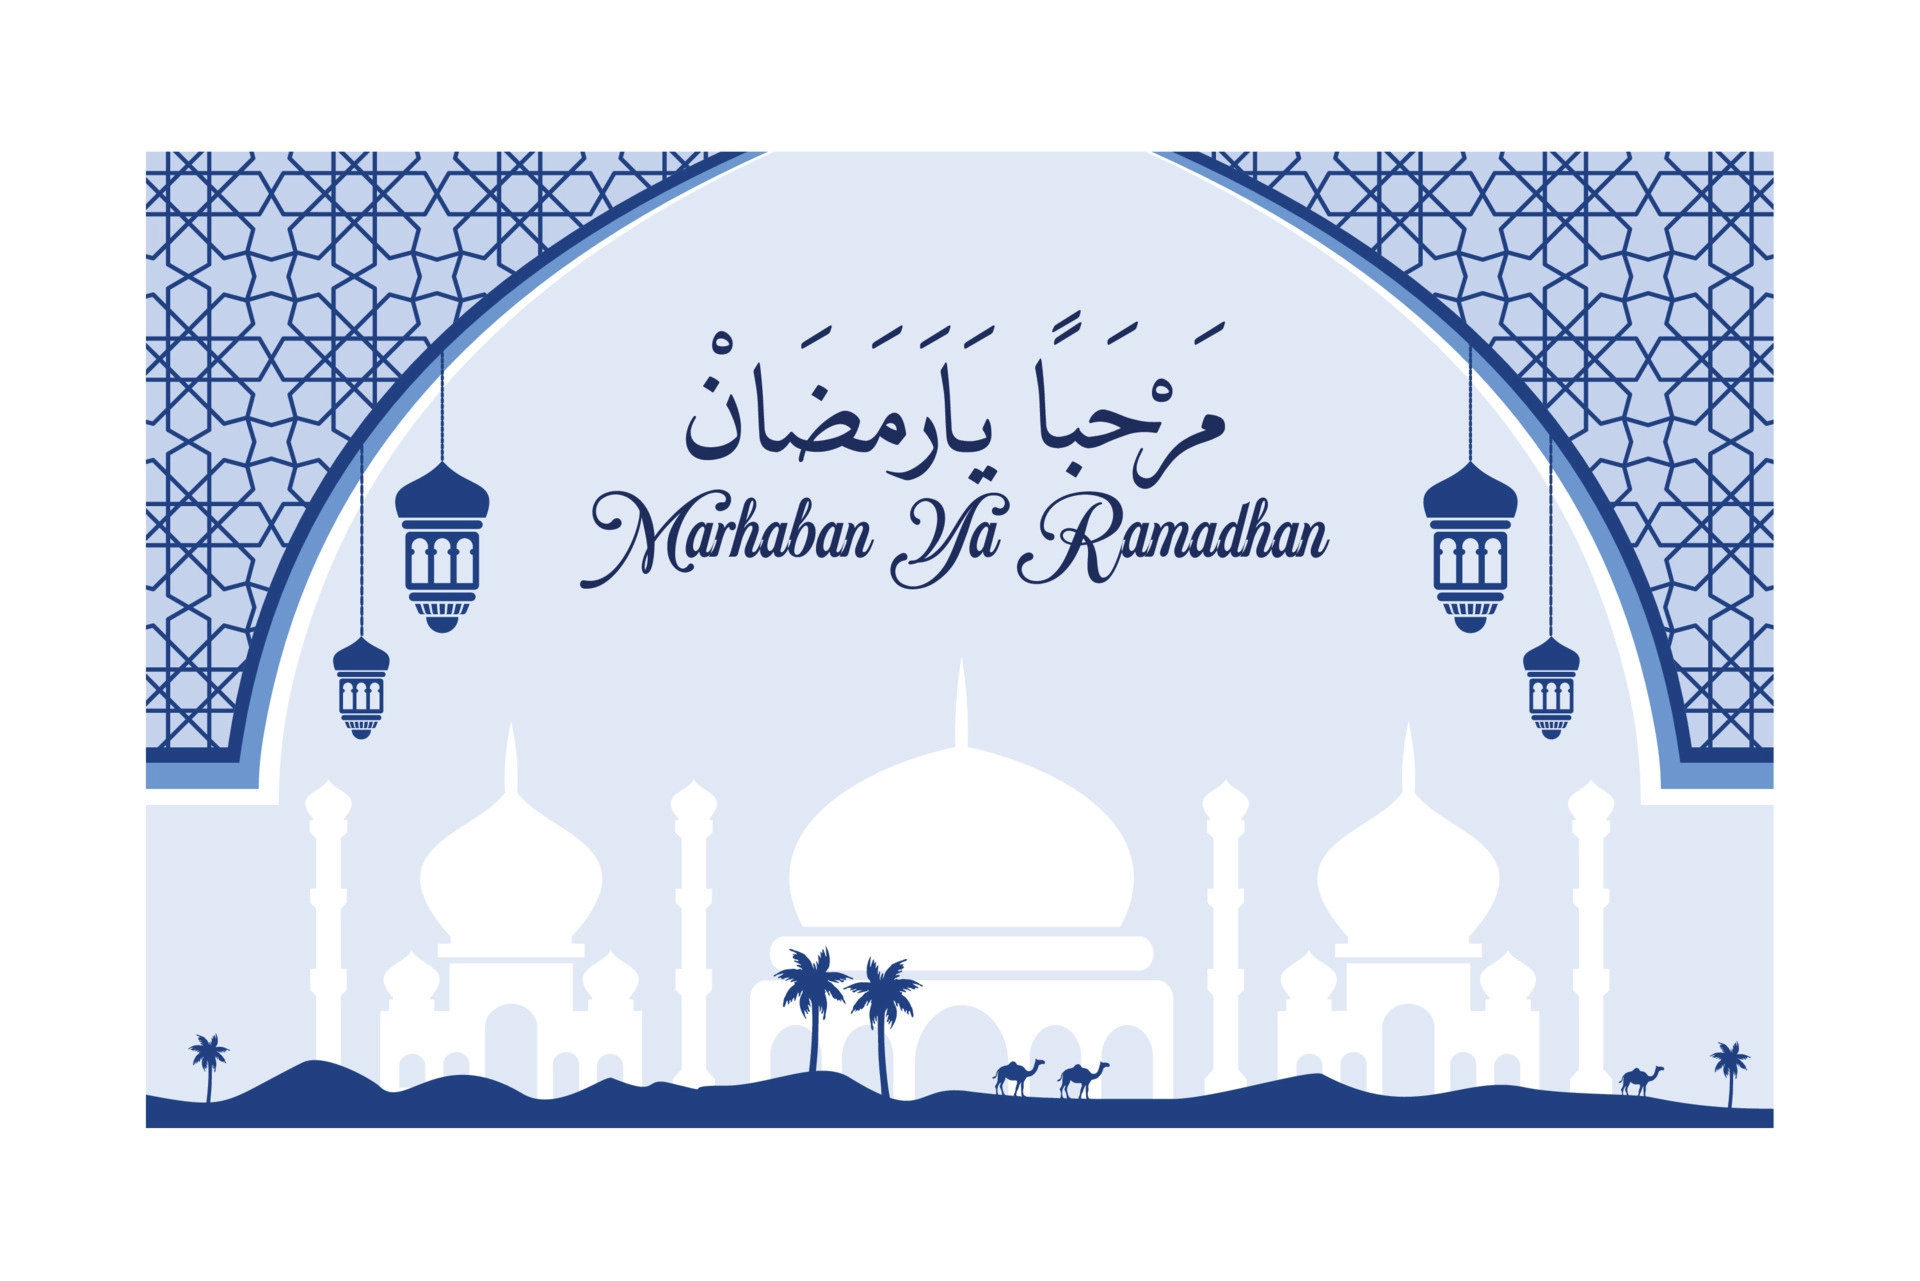 Beautiful Backgrounds For Ramadan Greetings And Text Of Marhaban Ya Ramadhan Means Welcome To The Ramadan Month Vector